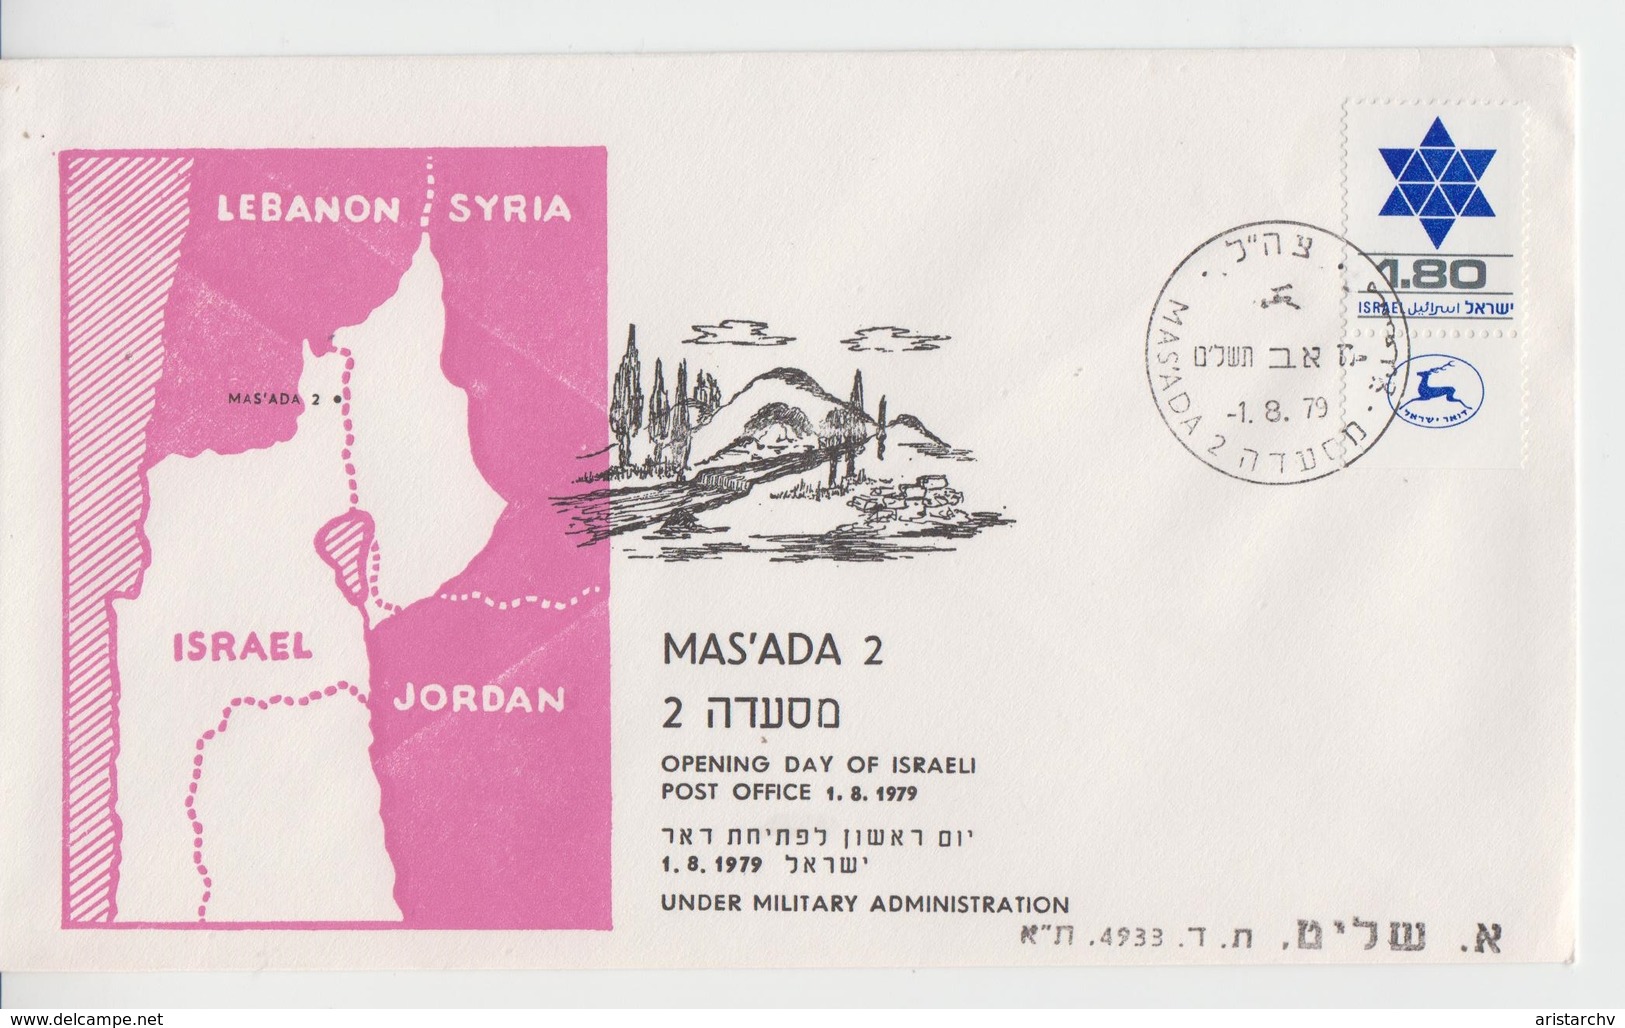 ISRAEL 1978 MASADA 2 OPENING DAY POST OFFICE UNDER MILITARY ASMINISTRATION TSAHAL IDF COVER - Postage Due